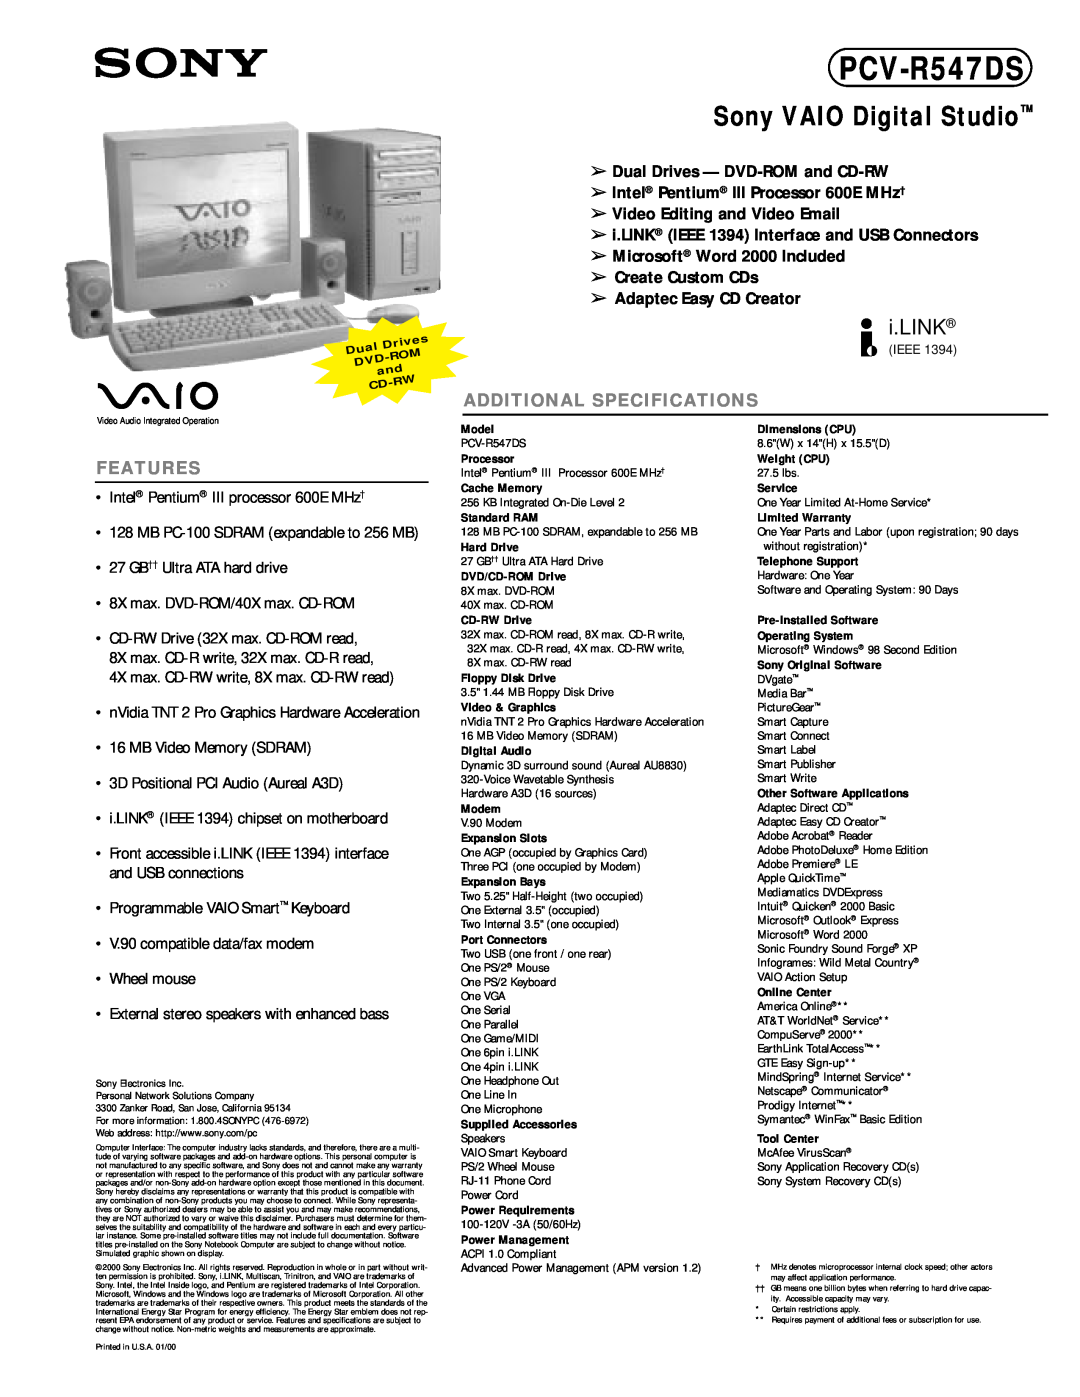 Sony PCV-R547DS dimensions Sony VAIO Digital Studio, i.LINK, Additional Specifications, Features 